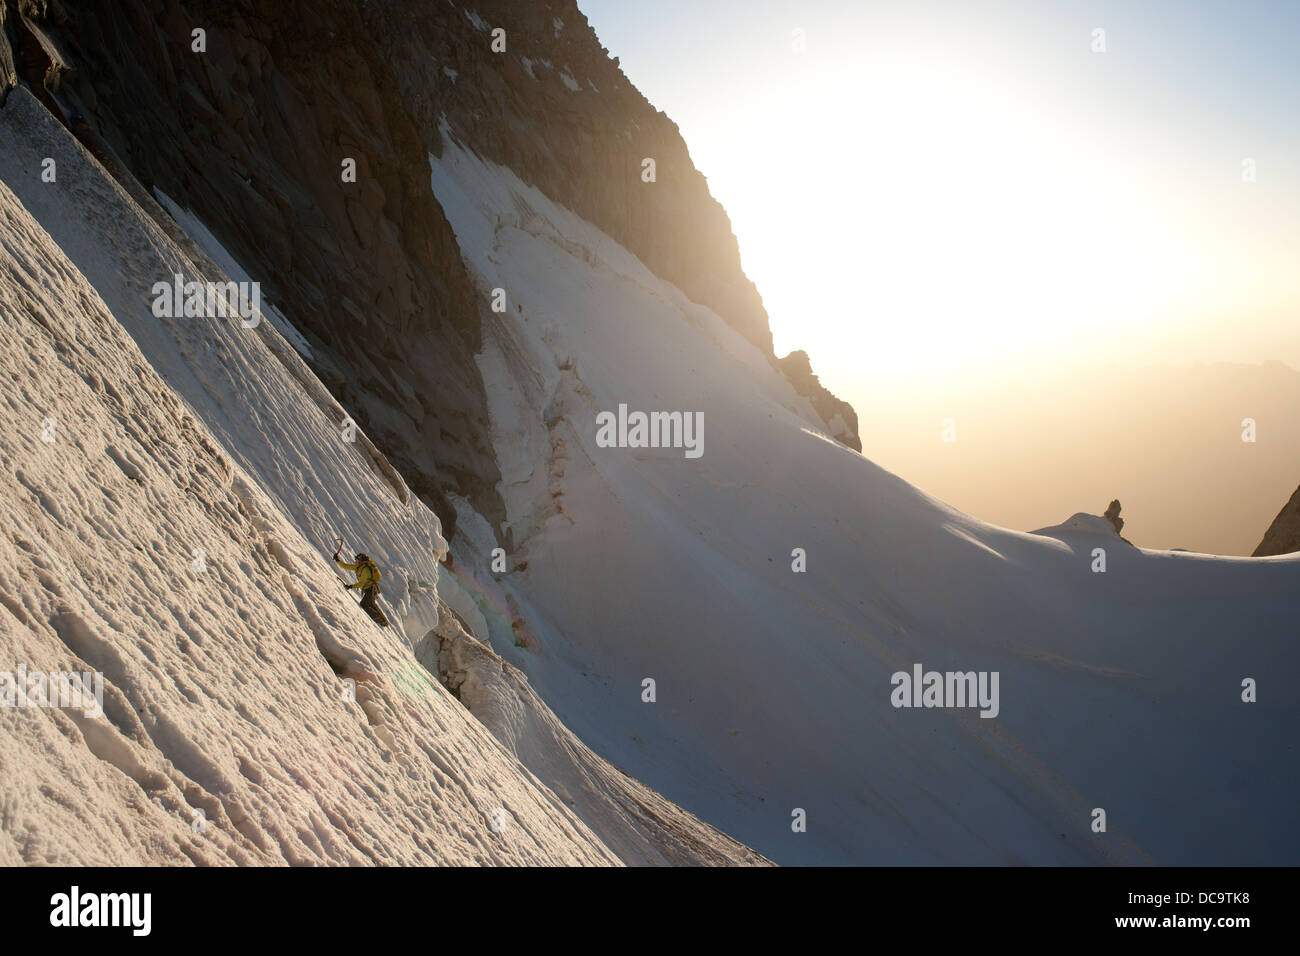 Alpinist climbing snow slope. Sunshine and snow crest is visible in background. Stock Photo